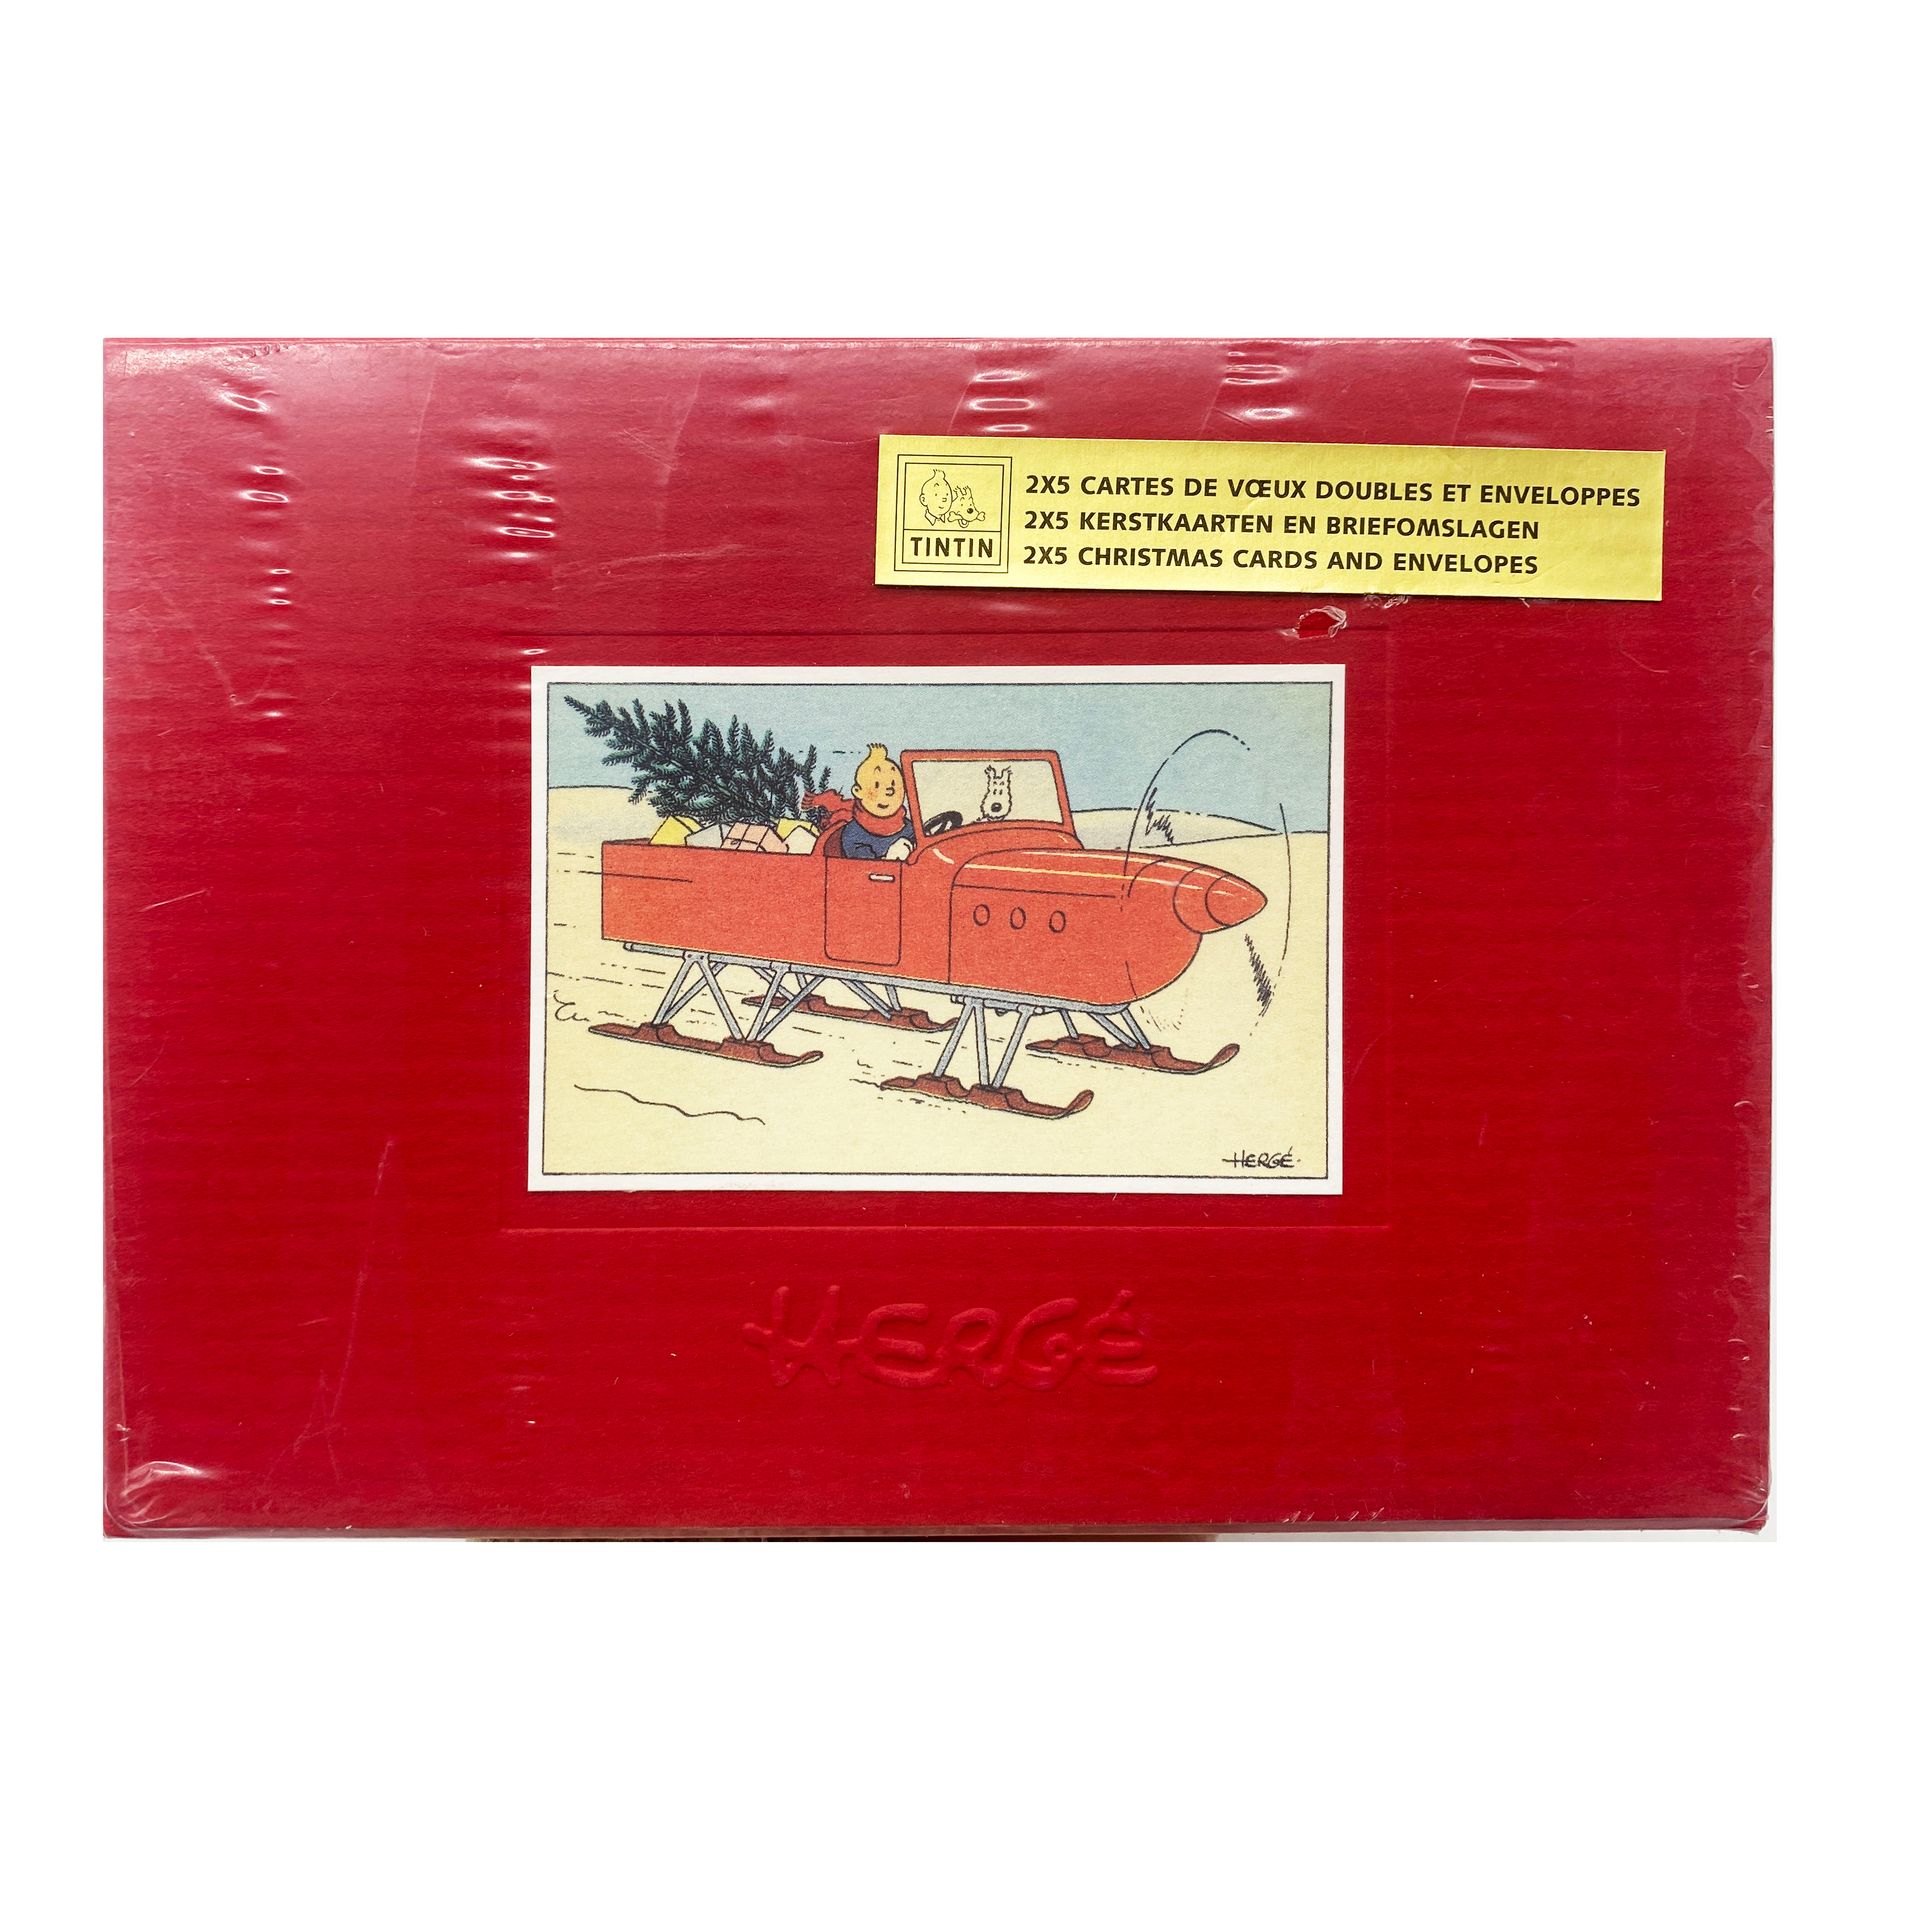 Null [HERGÉ] - "Tintin" - Small box containing 2x5 double greeting cards and env&hellip;